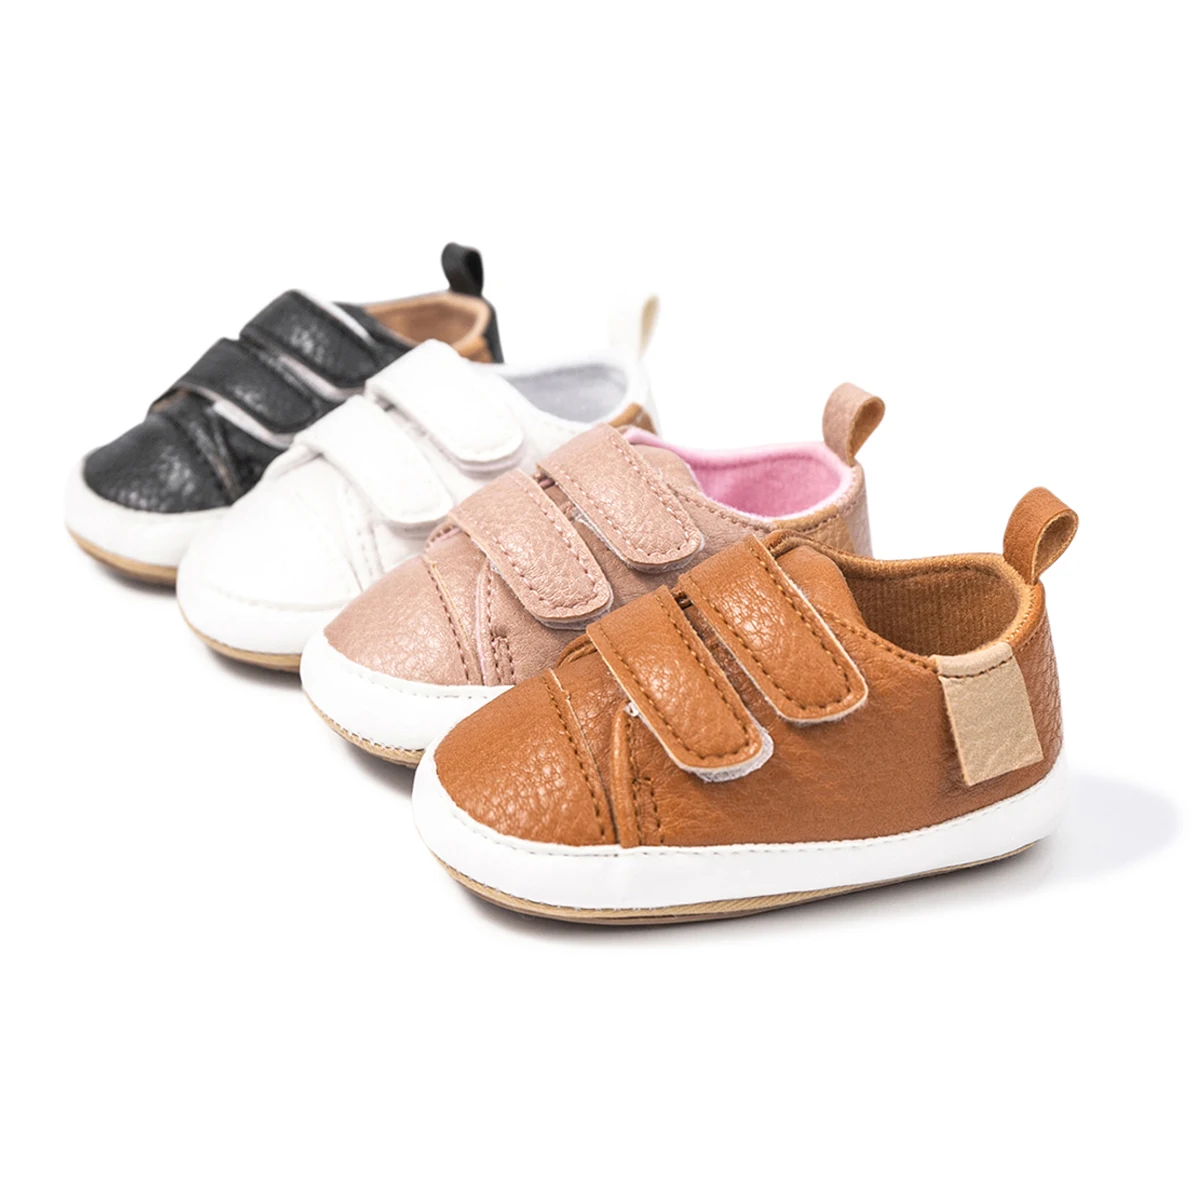 

MOQ 1 New designed Outdoor infant pu Walking shoes Soft sole anti slip Breathable organic baby sneakers for boy, 4 colors